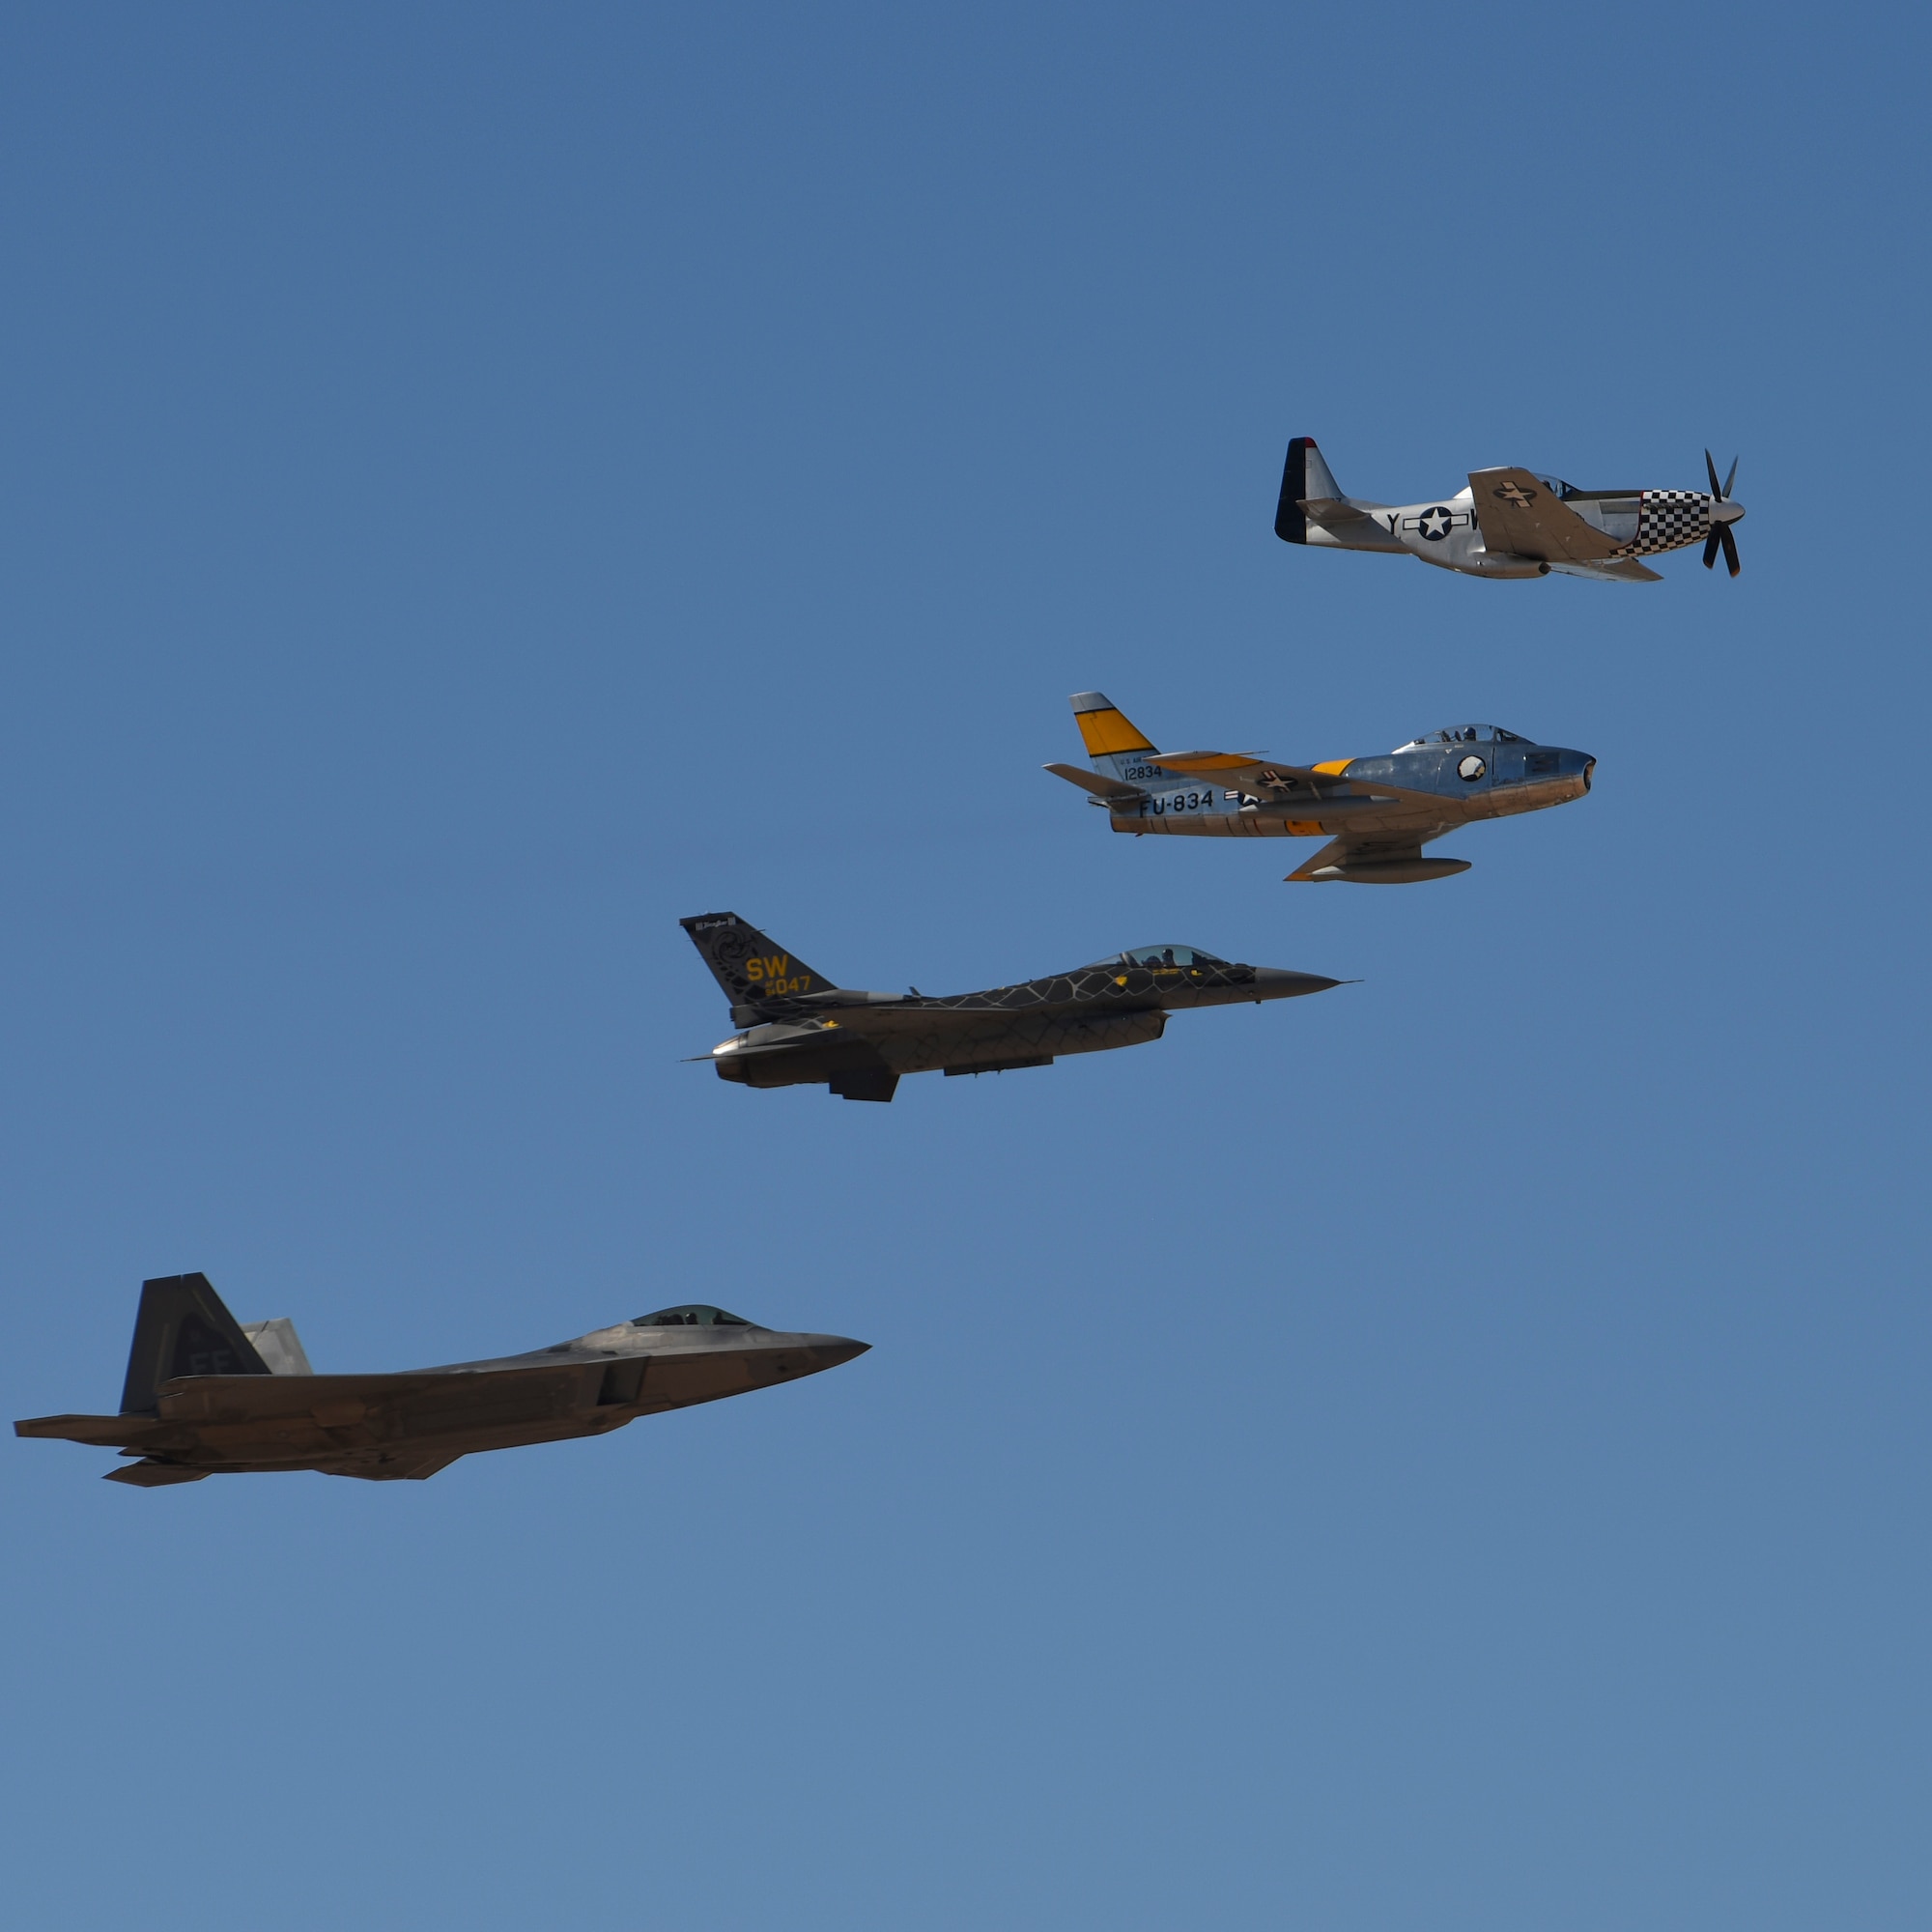 An F-22 Raptor, an F-16 Fighting Falcon, an F-86 Sabre and a P-51 Mustang in flight